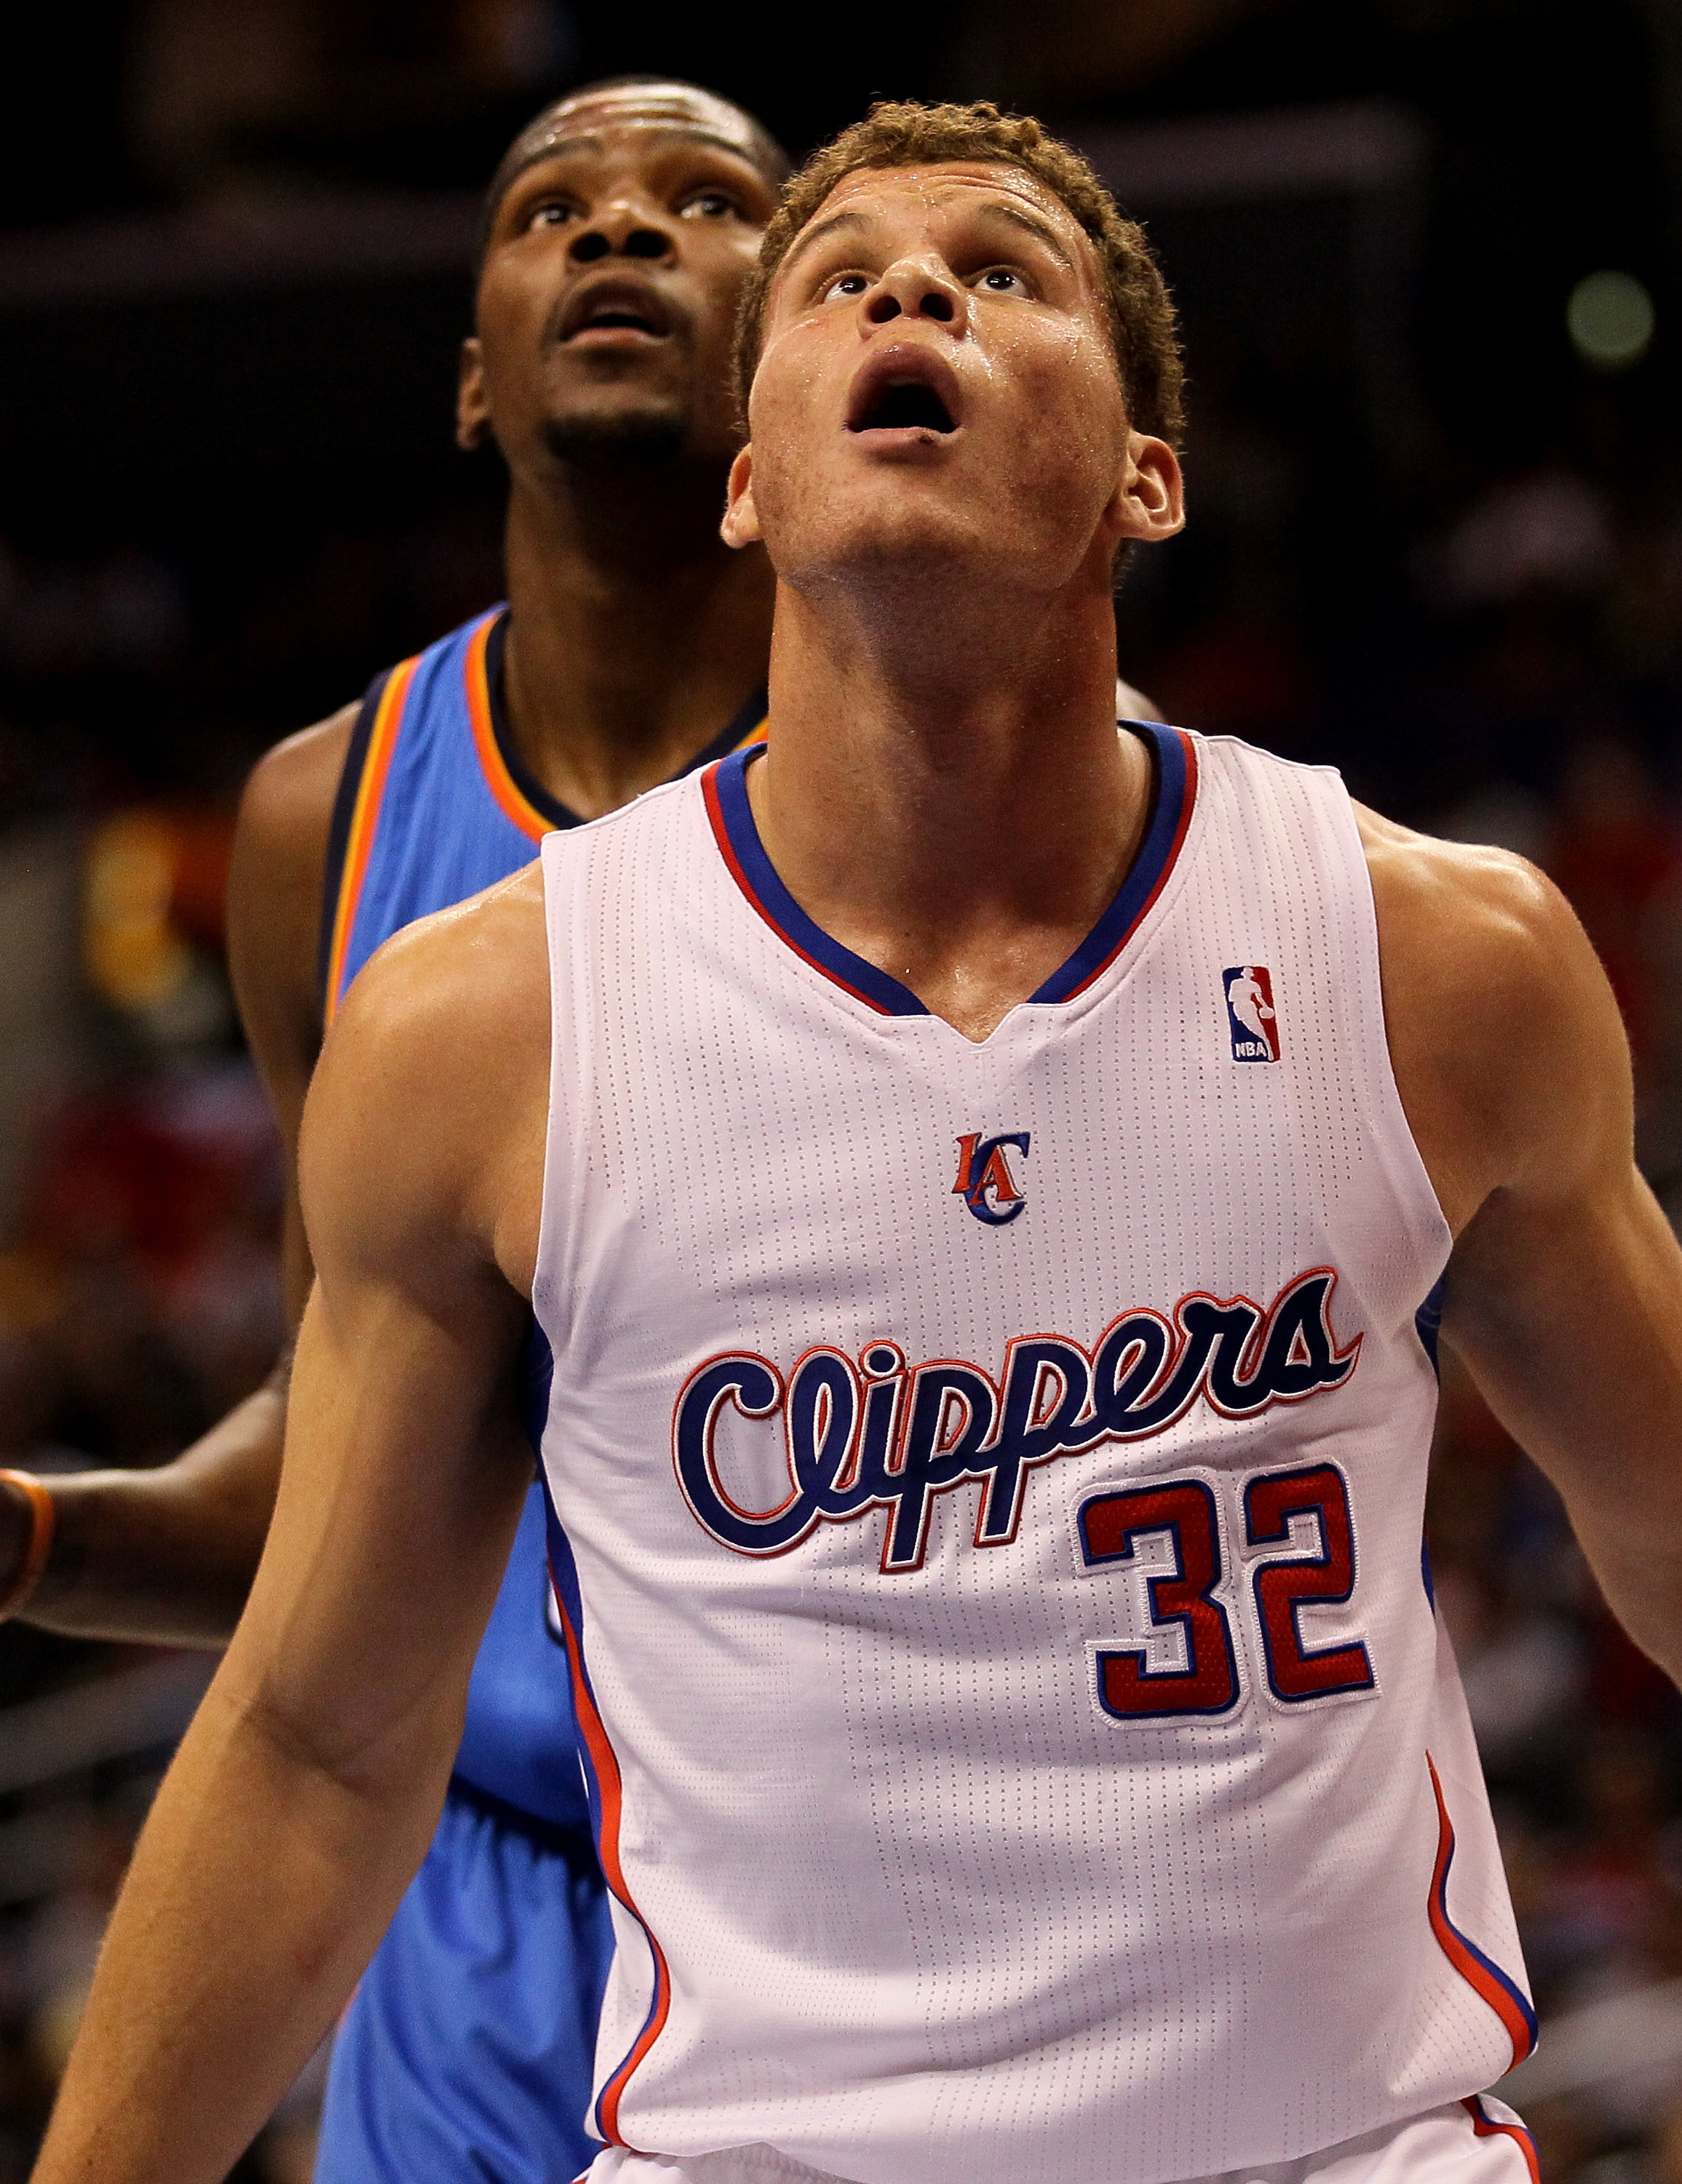 LOS ANGELES, CA - NOVEMBER 03:  Blake Griffin #32 of the Los Angeles Clippers and Kevin Durant #35 of the Oklahoma City Thunder look for a rebound at Staples Center on November 3, 2010 in Los Angeles, California. The Clippers won 107-92.  NOTE TO USER: Us